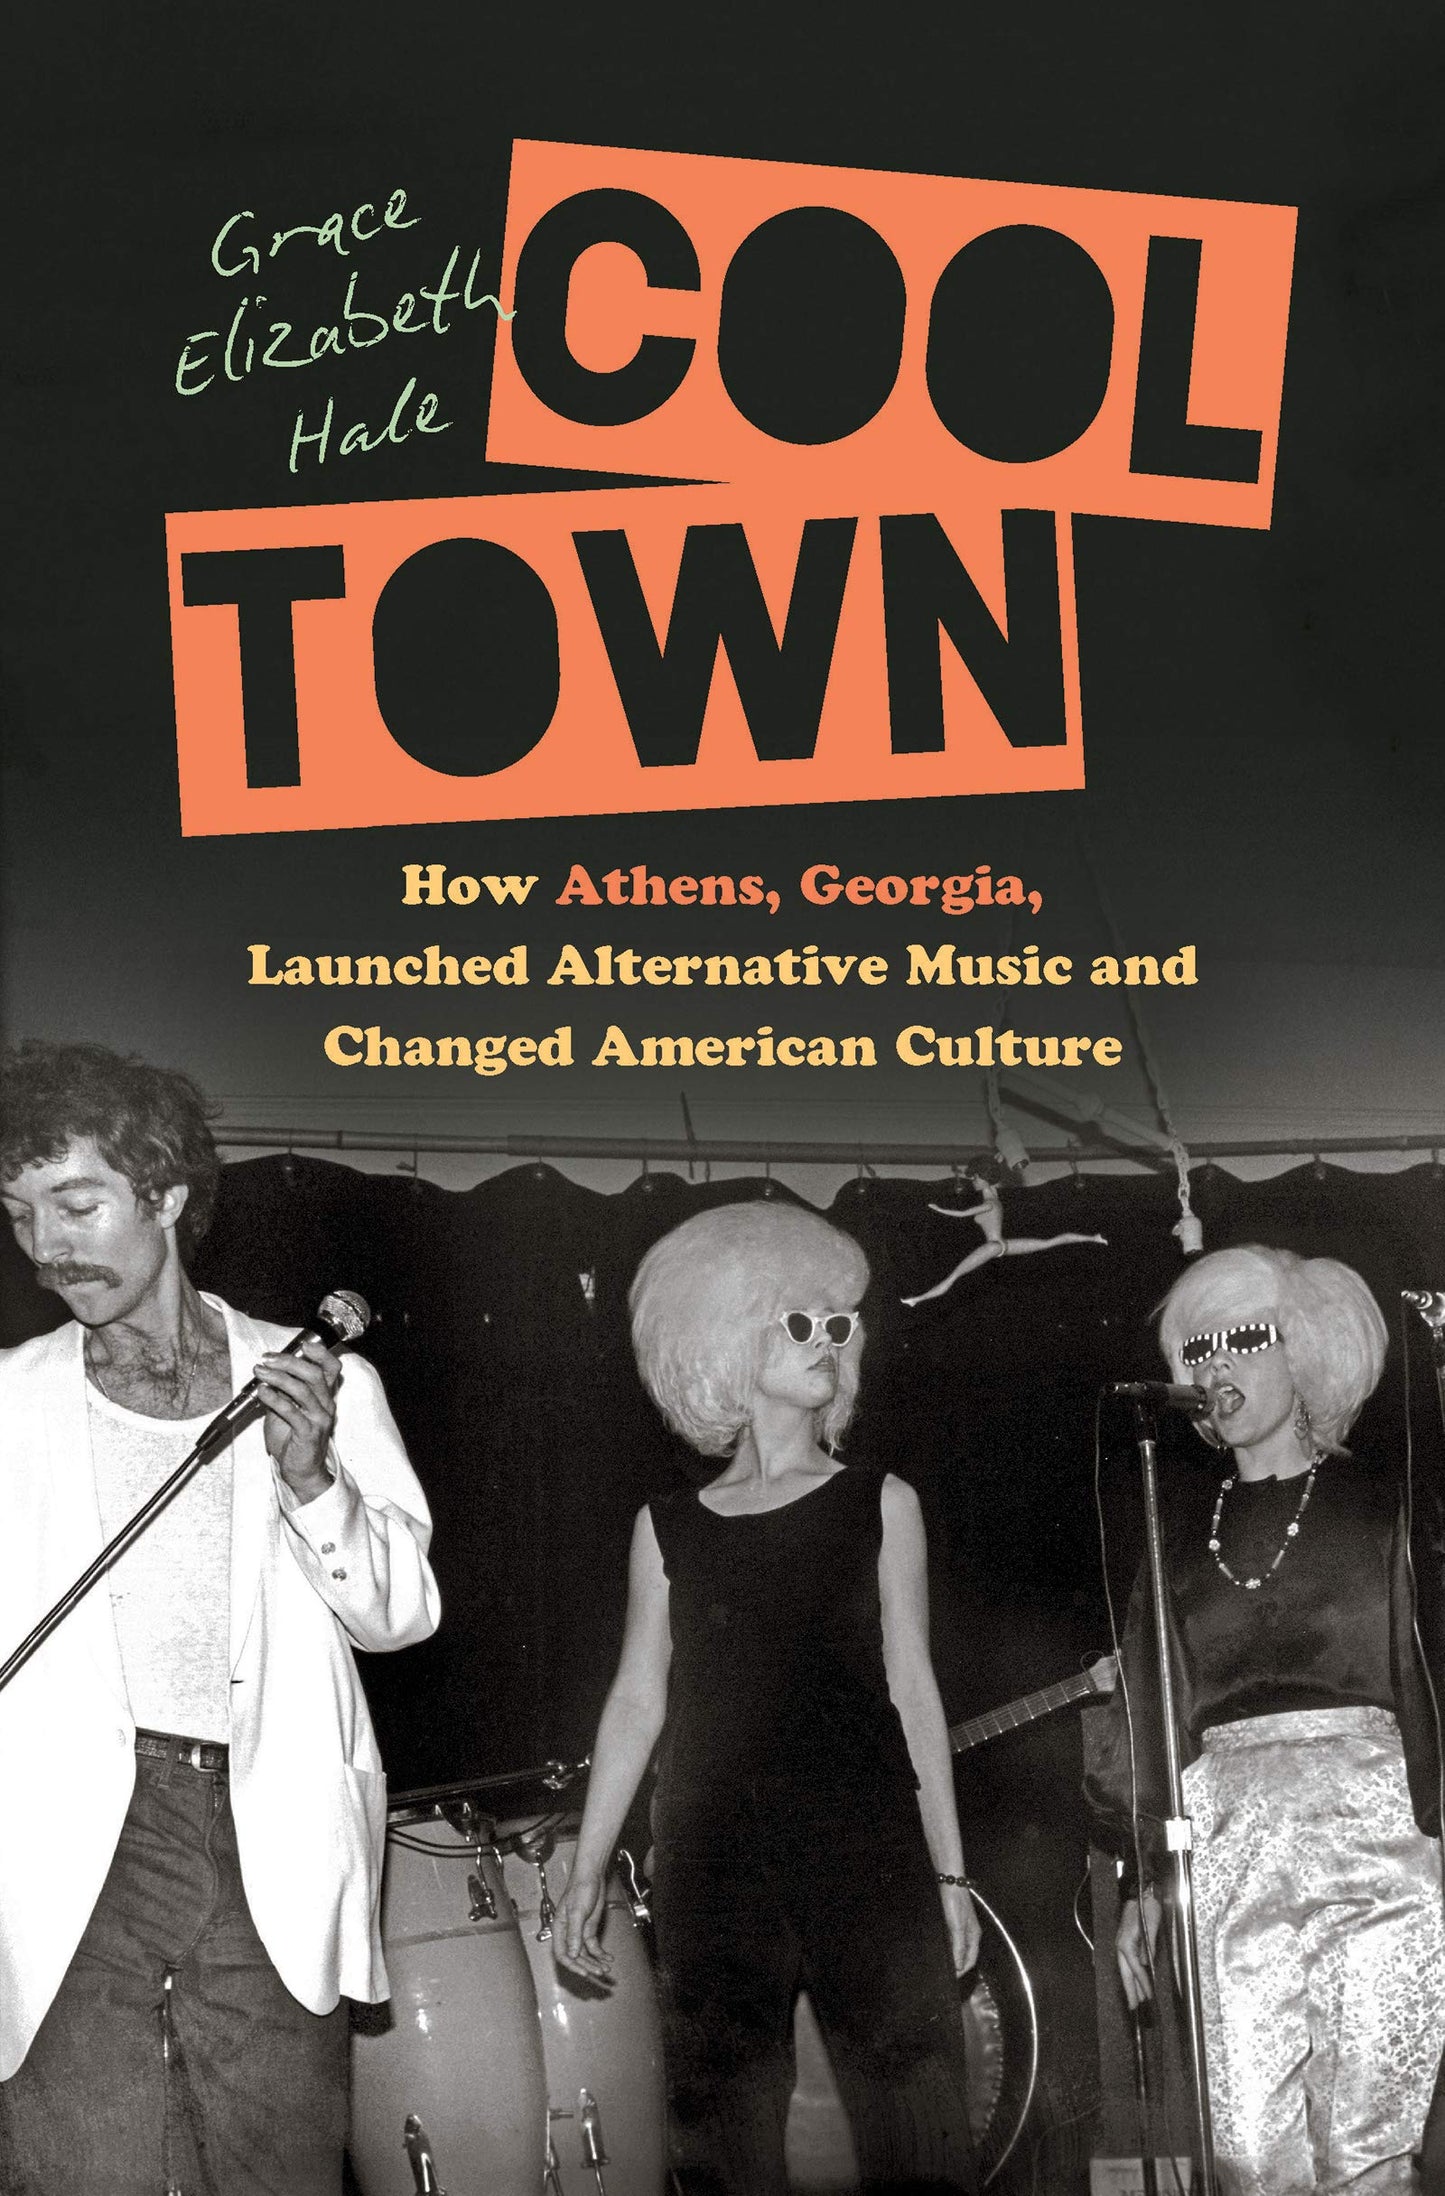 COOL TOWN: HOW ATHENS, GEORGIA, LAUNCHED ALTERNATIVE MUSIC AND CHANGED AMERICAN CULTURE - BOOK